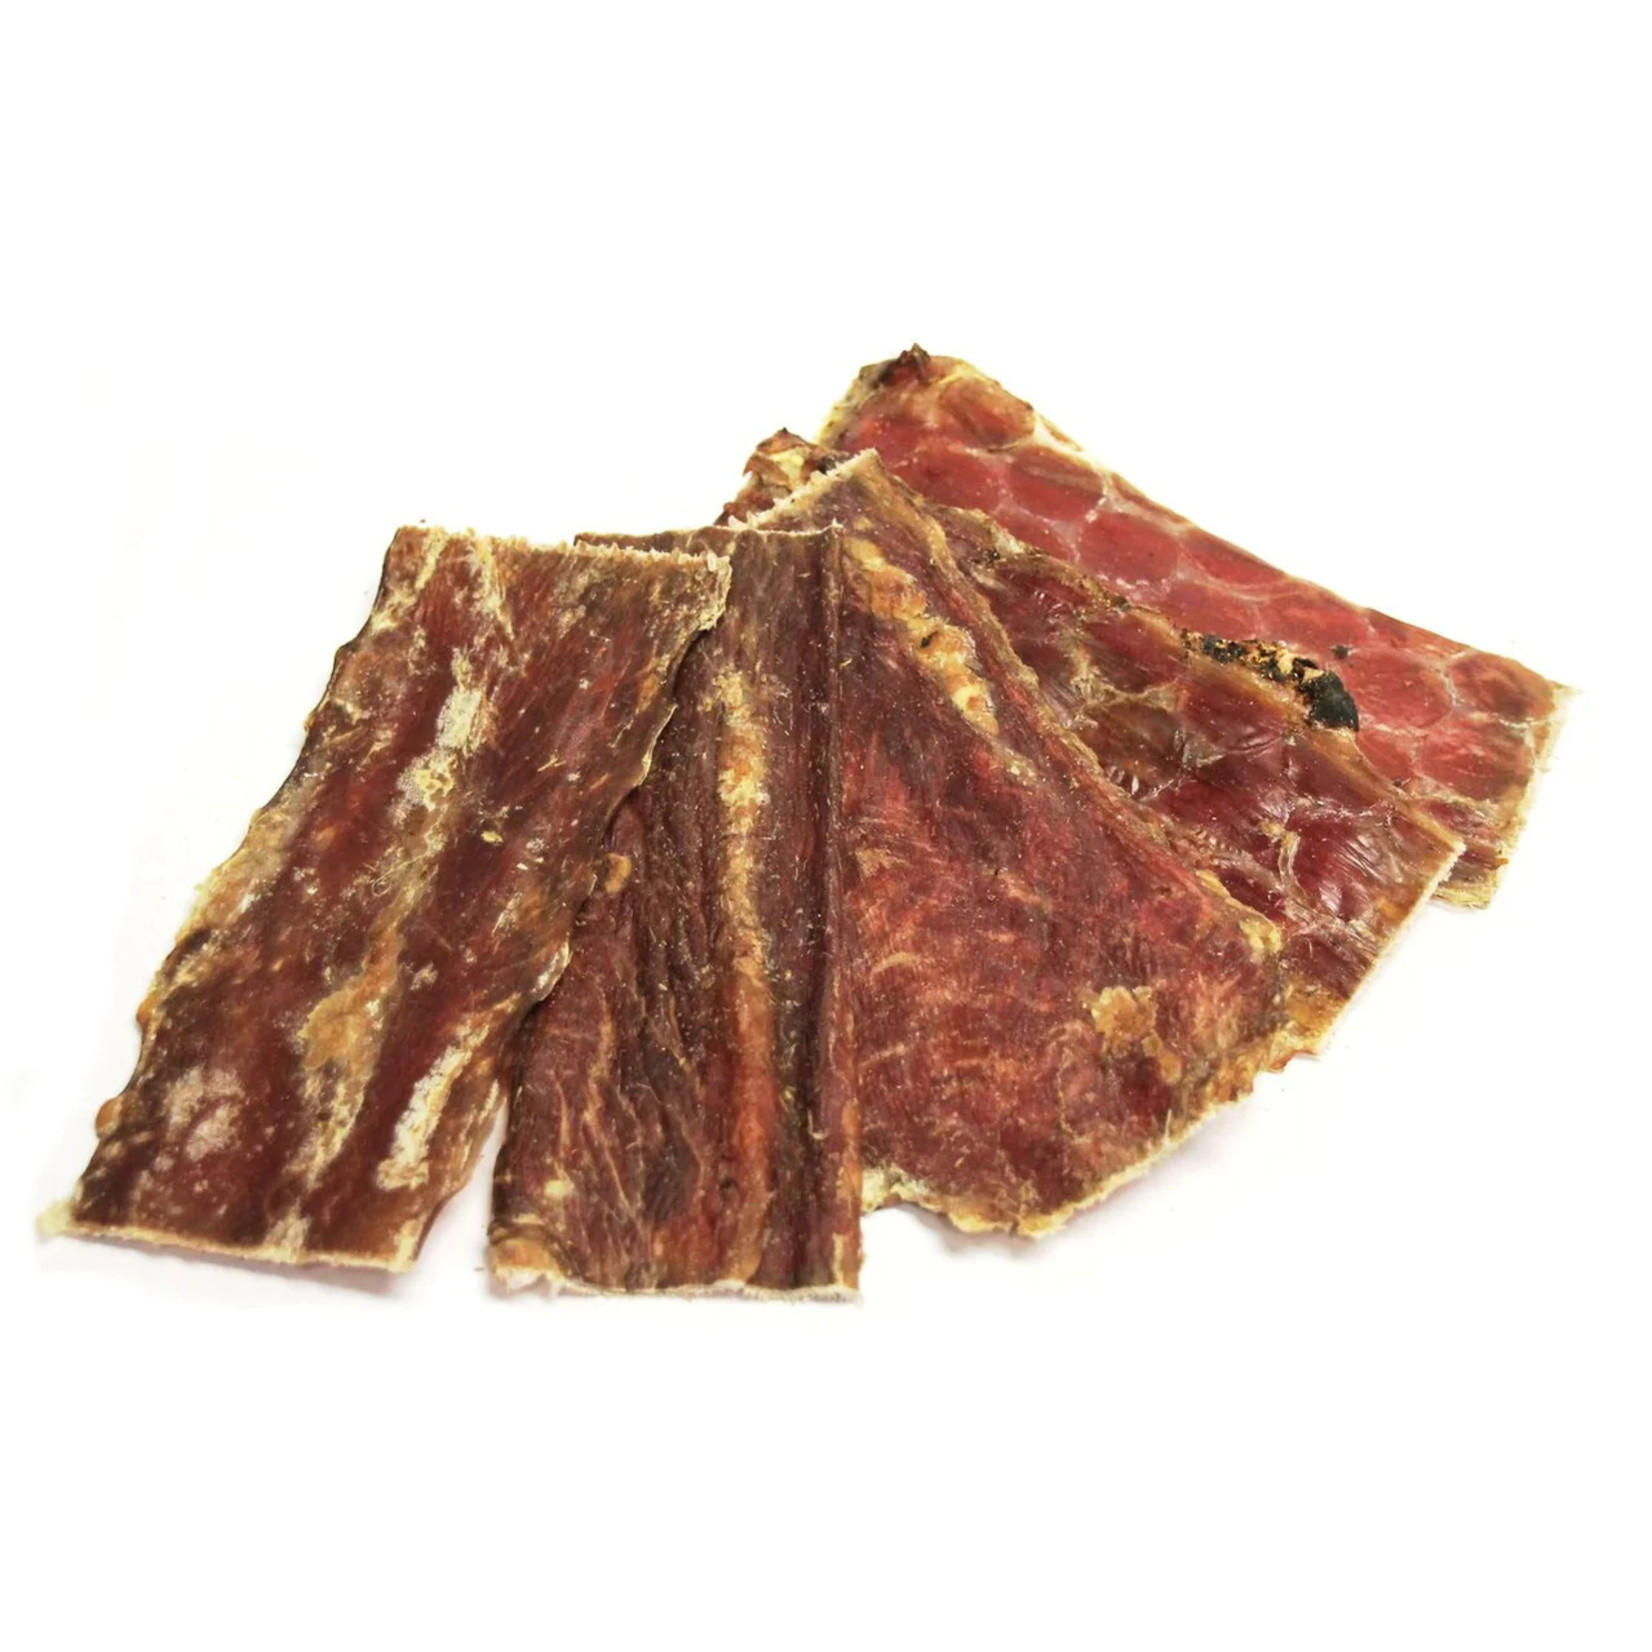 Tuesday's Natural Dog Company Tuesday's Natural Dog Company Beef Gullet Strips